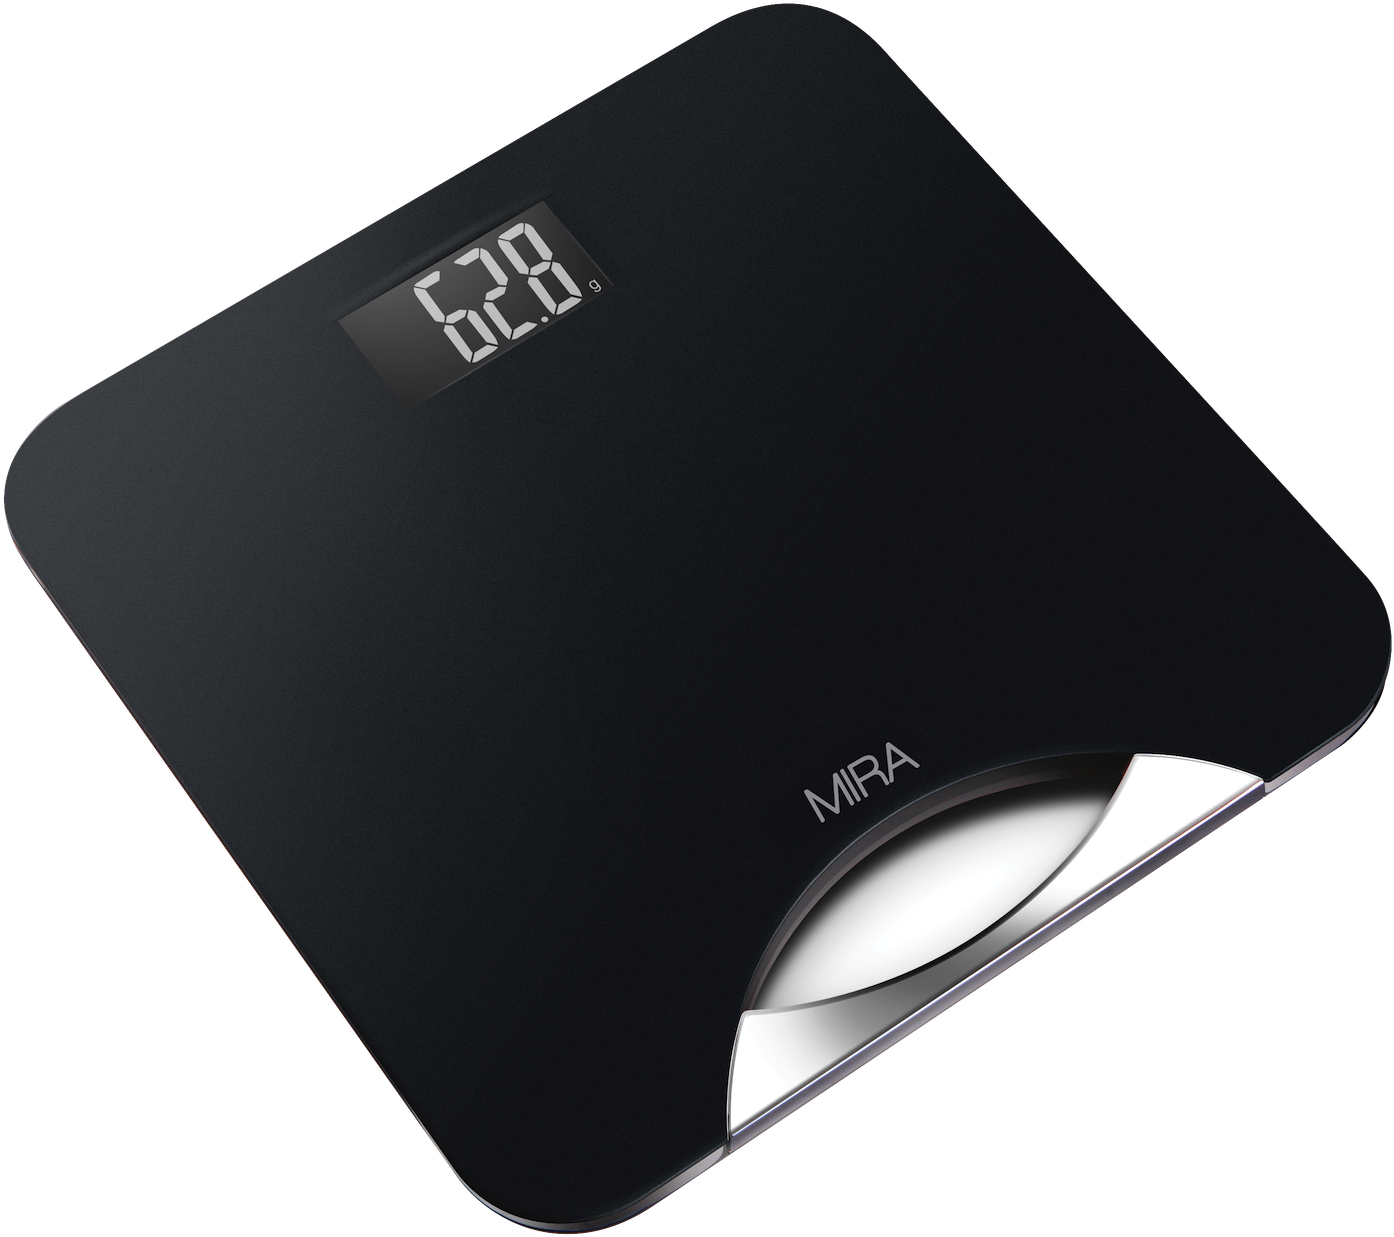 Weight Scales Png Transparent Images - Electronics (1485x1485)